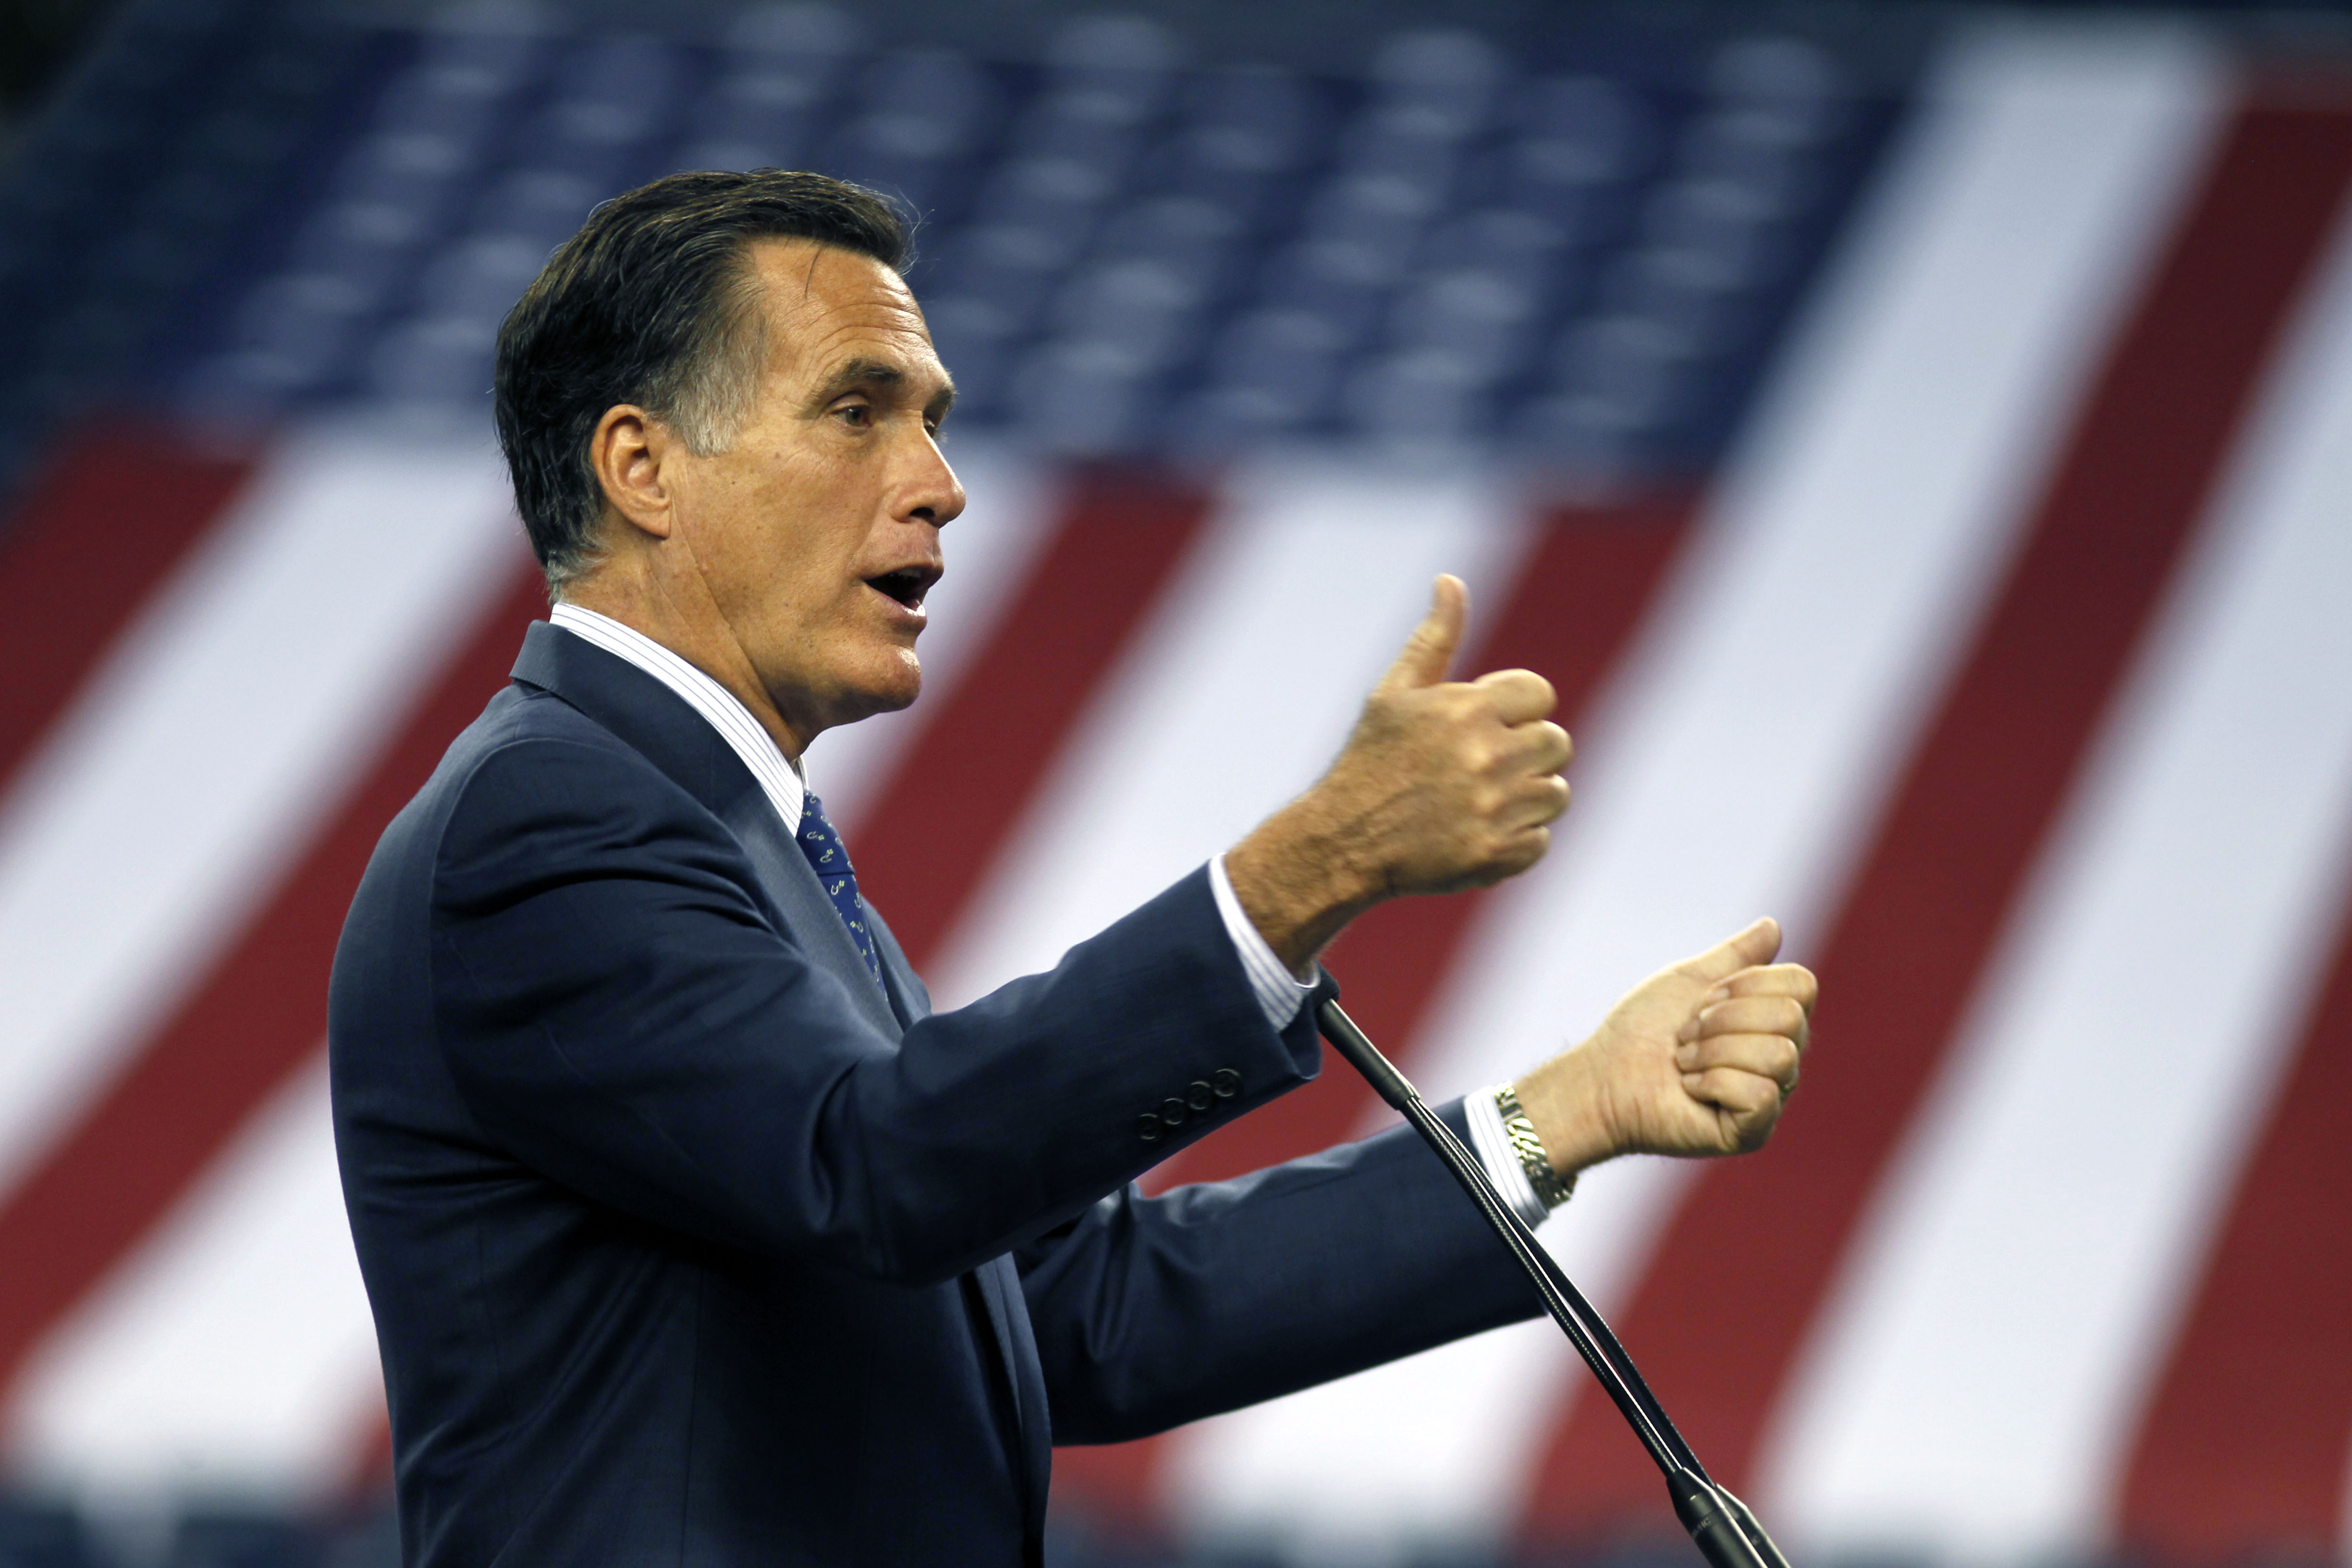 Internal polls: Romney up one in OH, two in IA, three in NH, tied in PA and WI